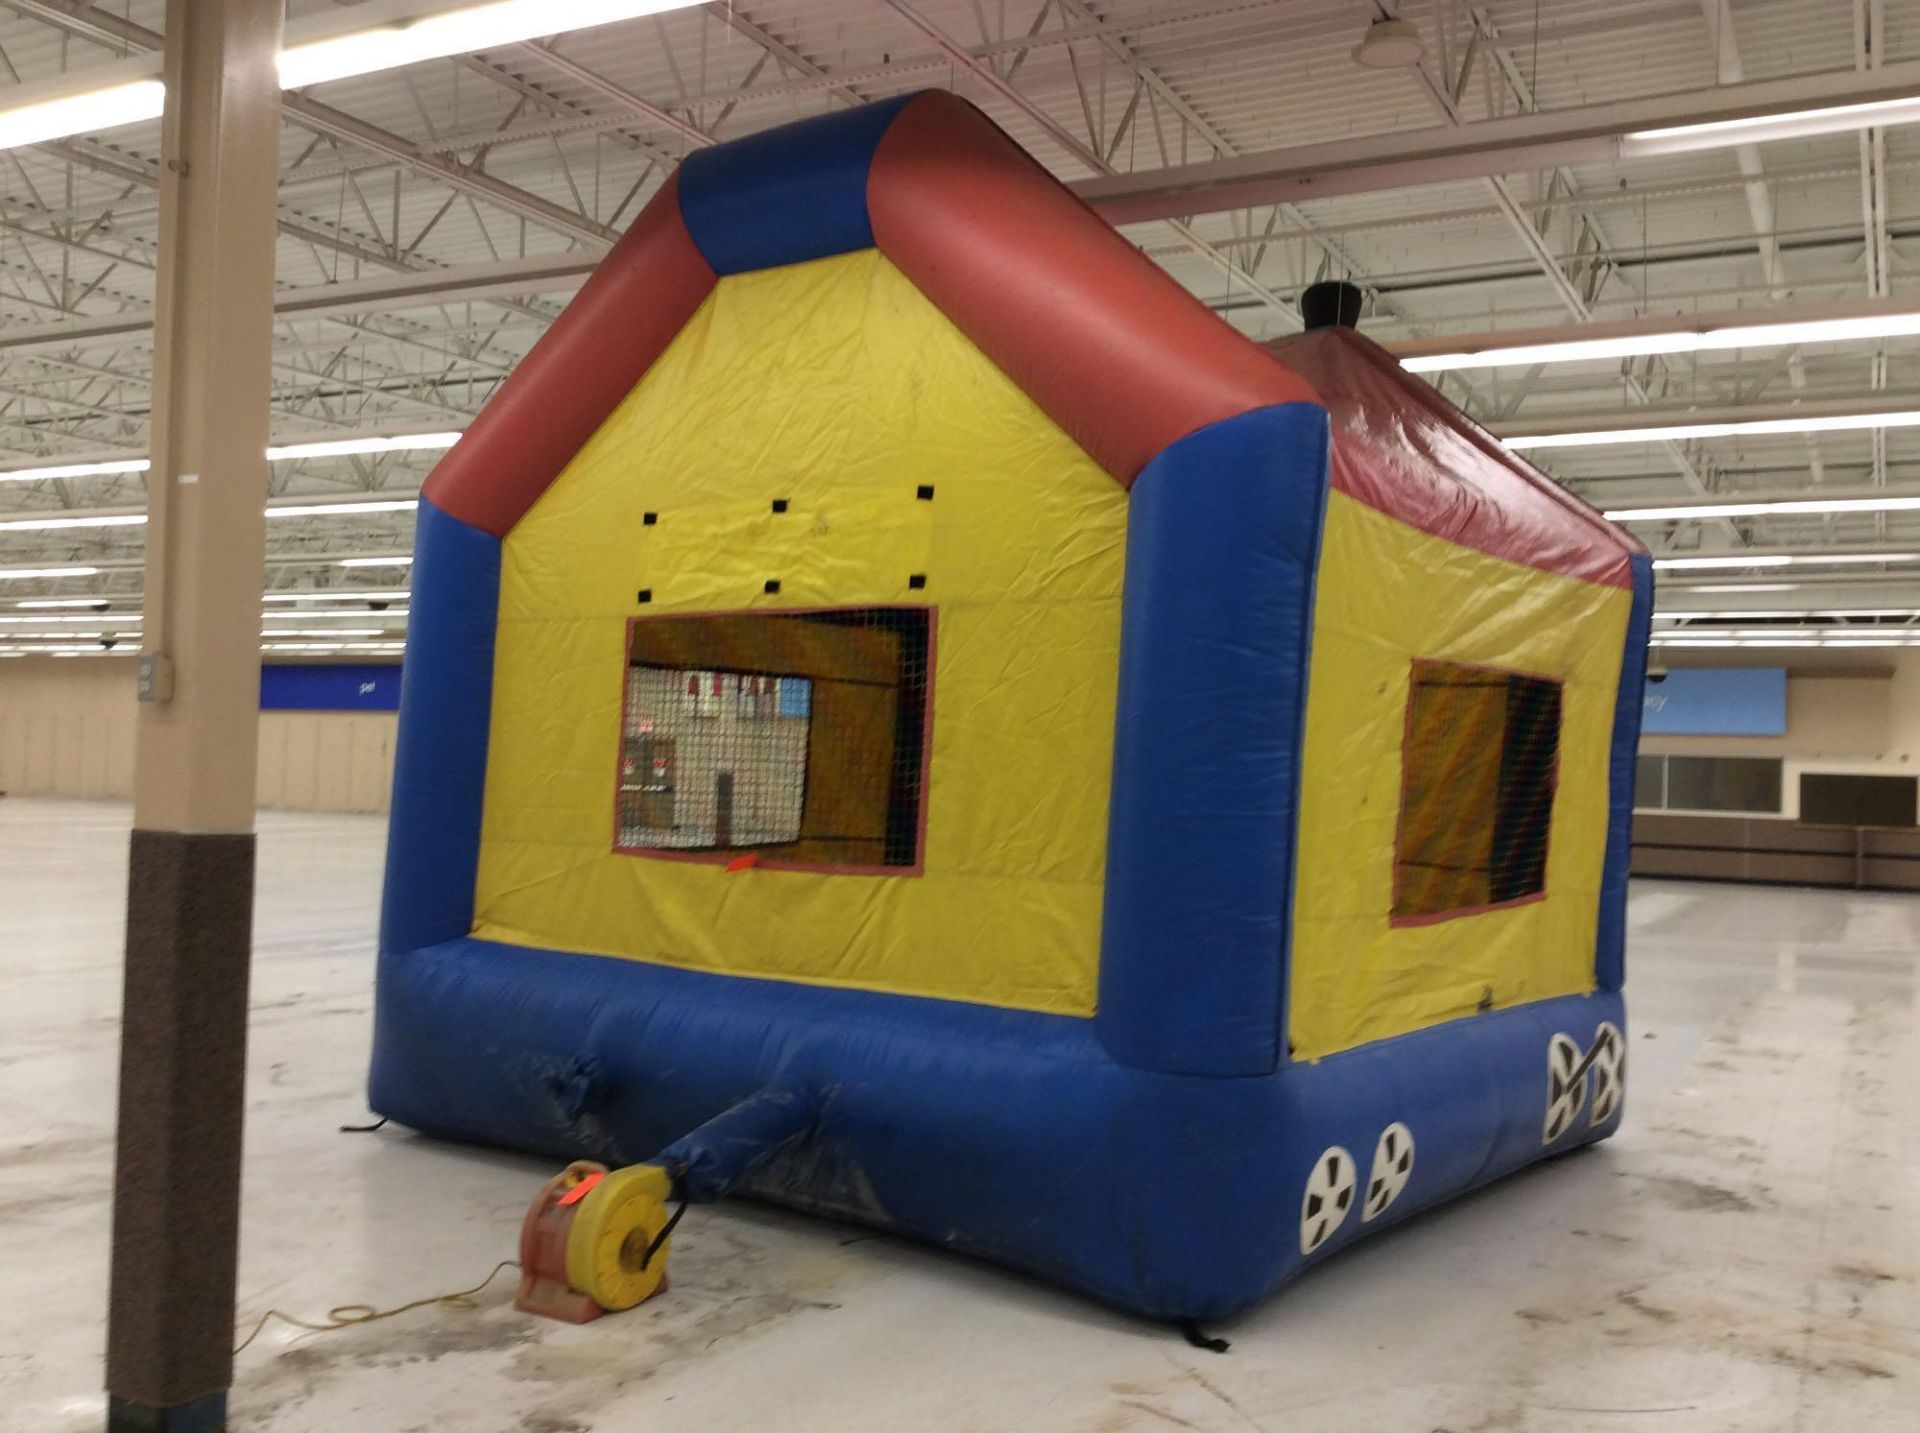 15' x 15' inflatable bounce house train, with blower - Image 3 of 5